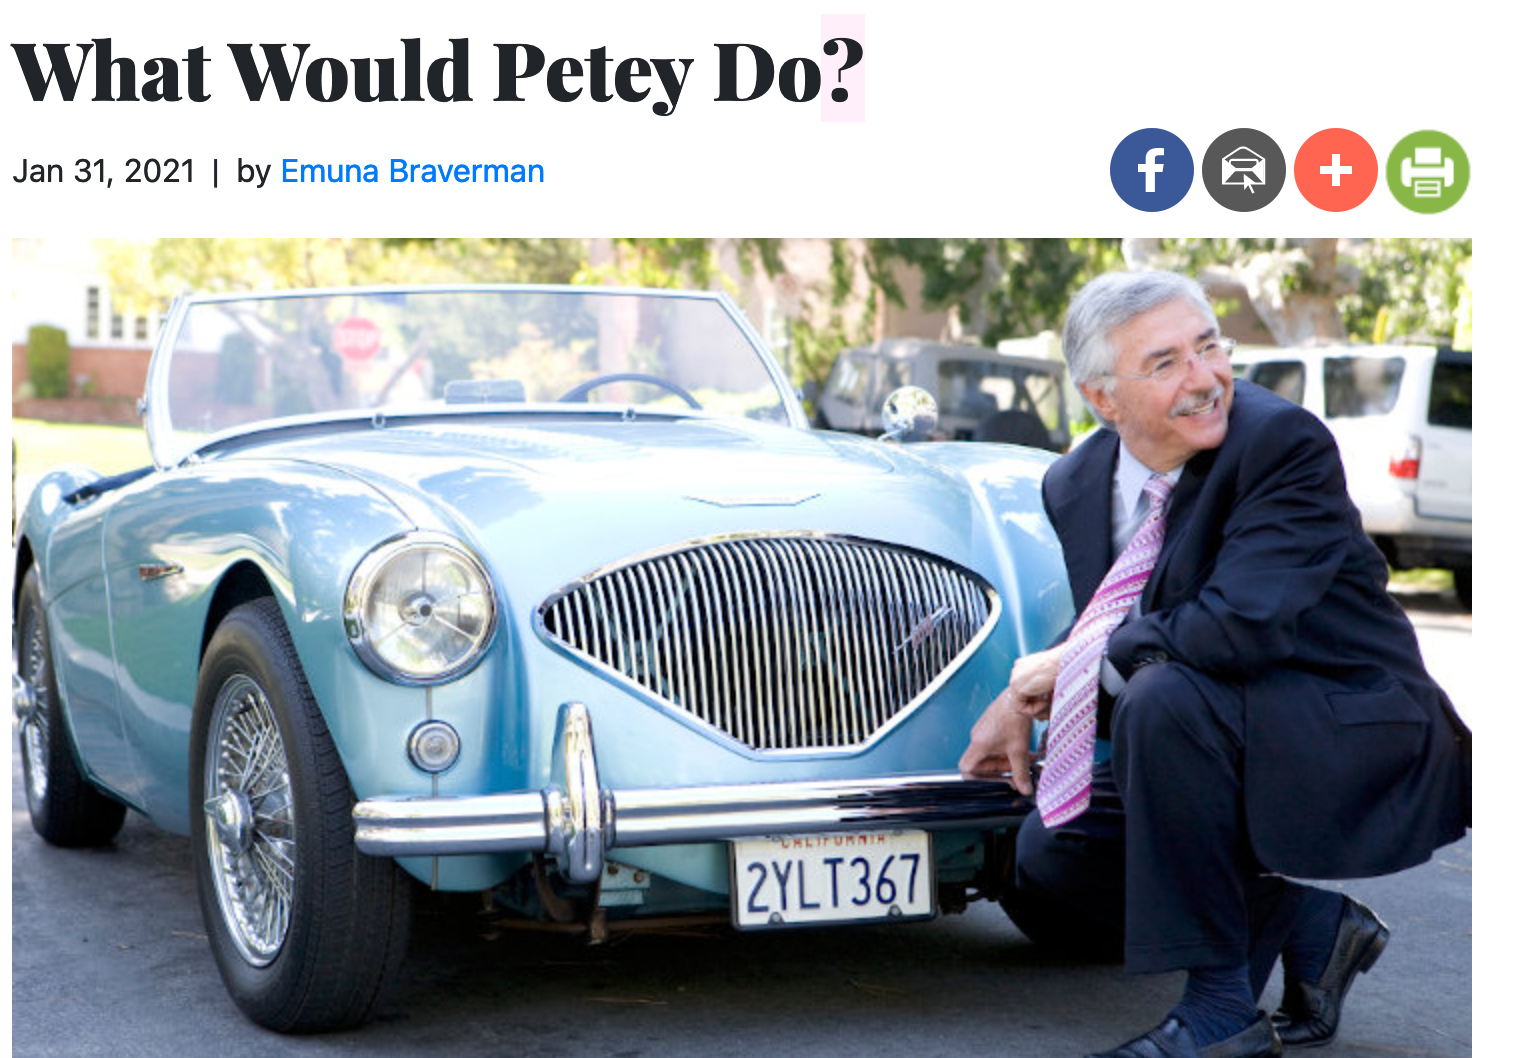 What Would Petey Do? by Emuna Braverman